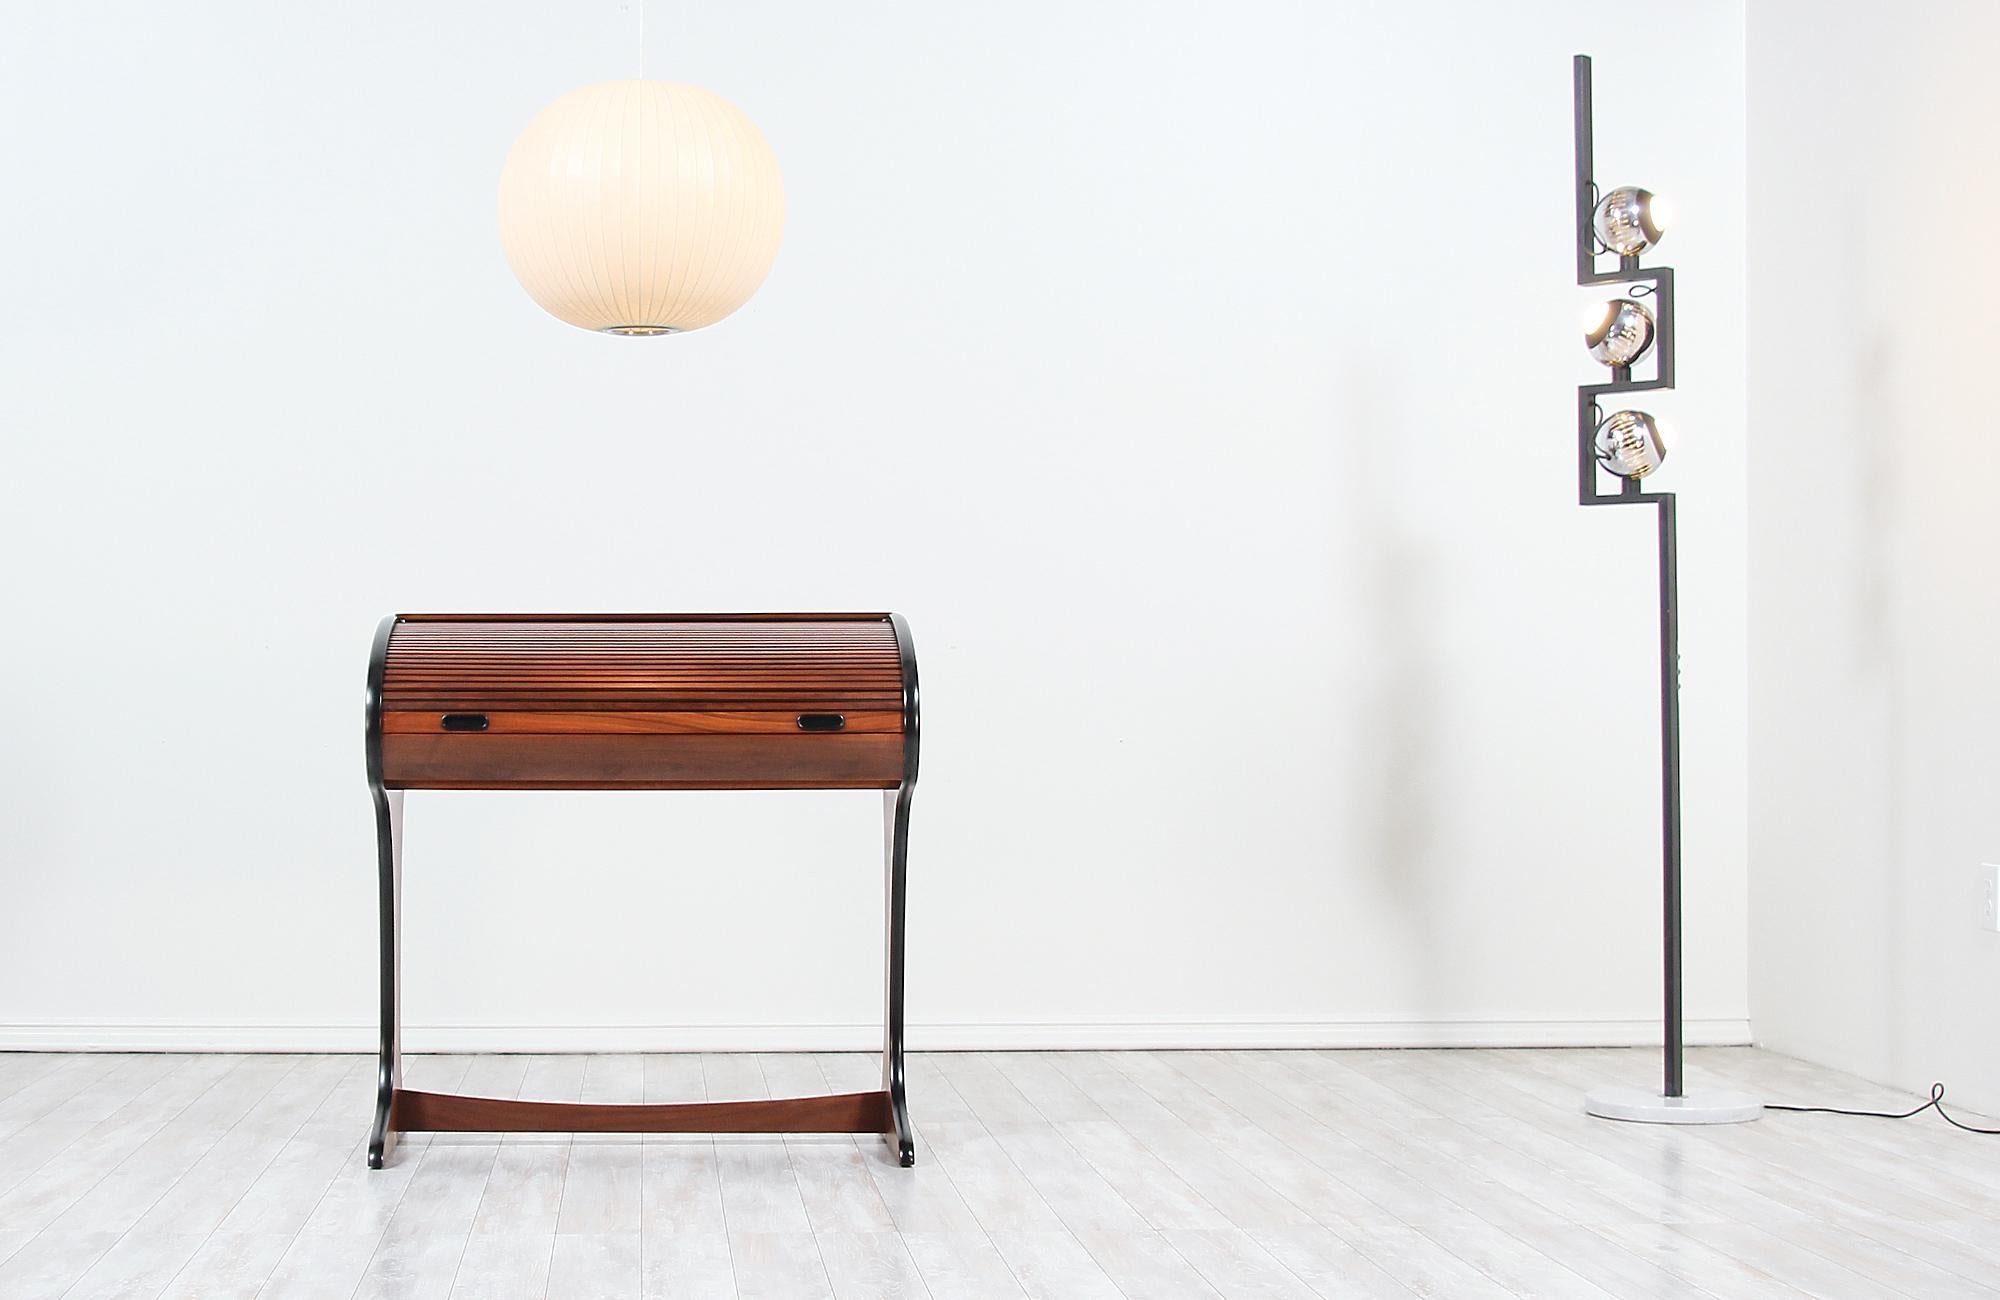 Elegant vintage writing desk designed and manufactured in the United States, circa 1960s. This rare piece features a walnut wood case with roll-top tambour-doors that slide back revealing a writing surface. Its fitted interior offers plenty of